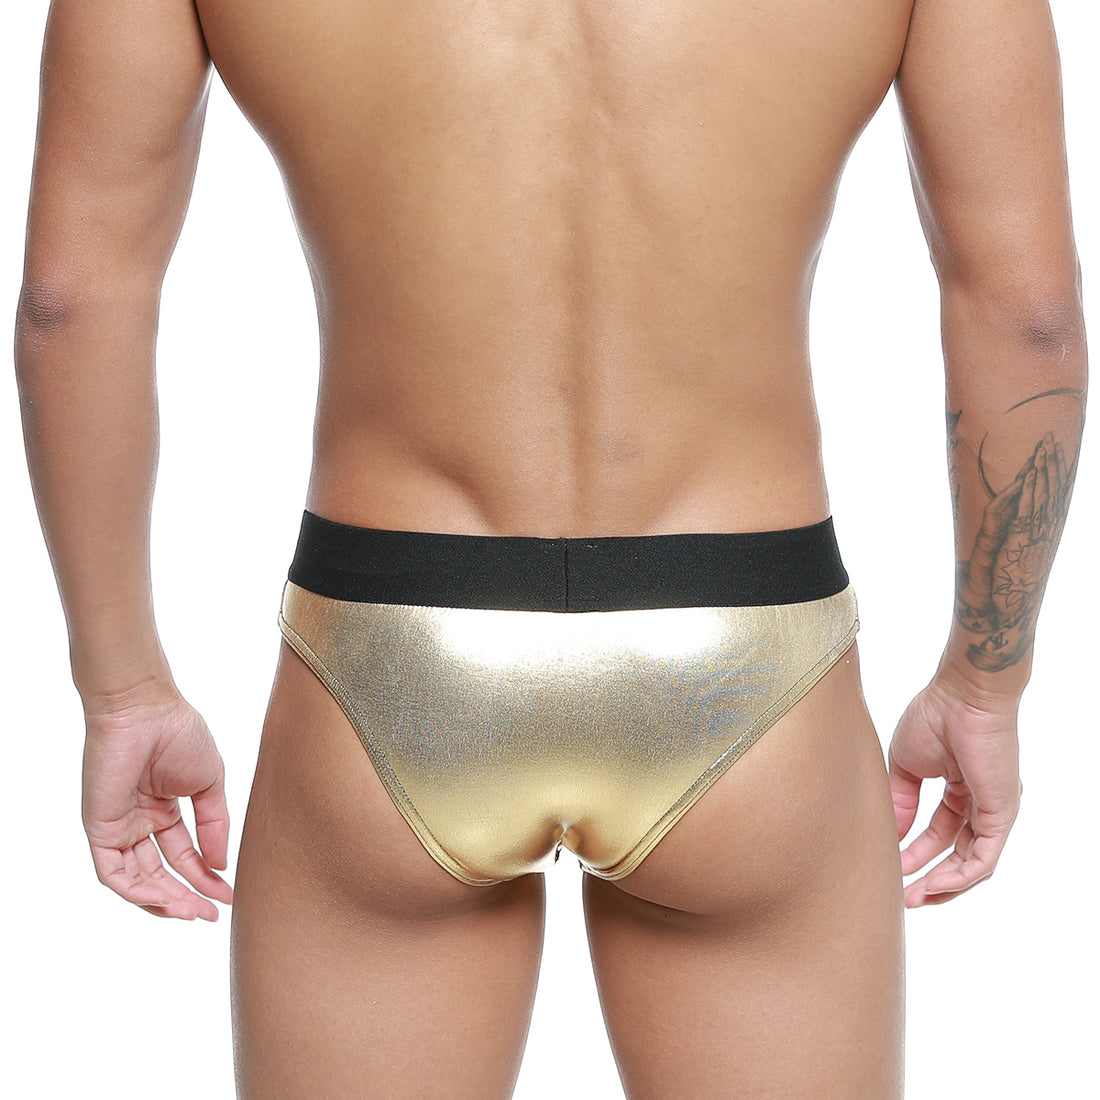 [MetroMuscleWear] Sierra Competition Suit Gold (4974-86)